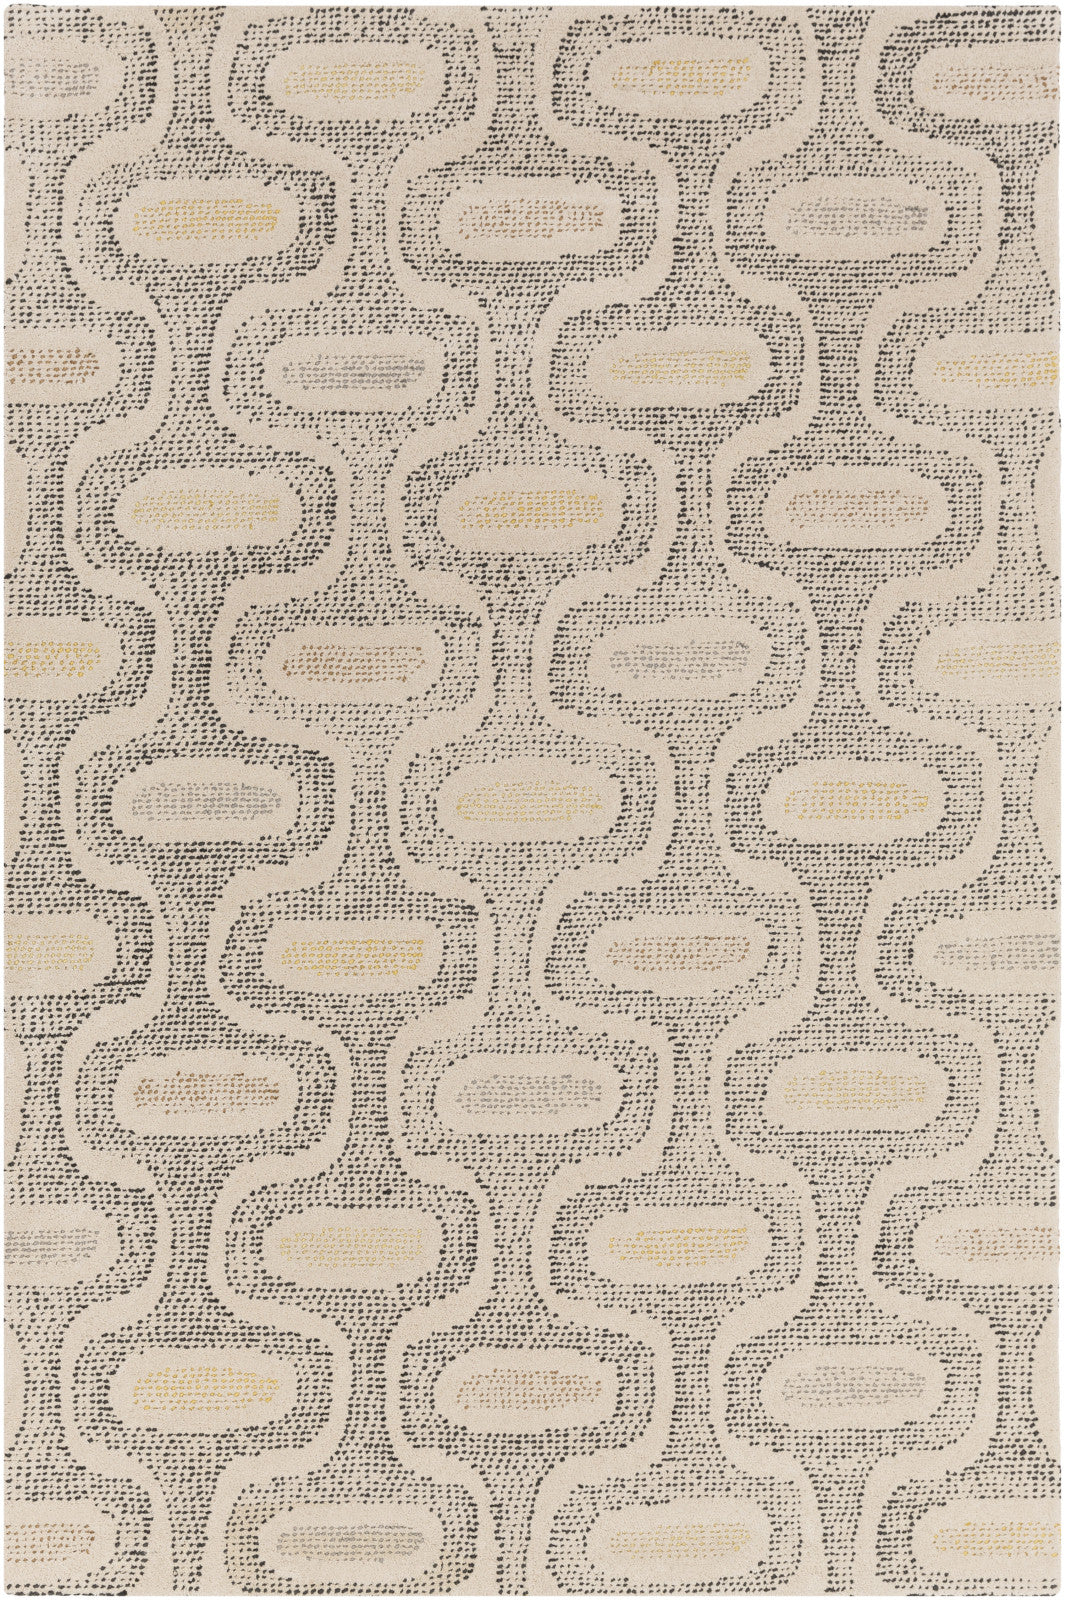 Melody MDY-2012 White Area Rug by Surya